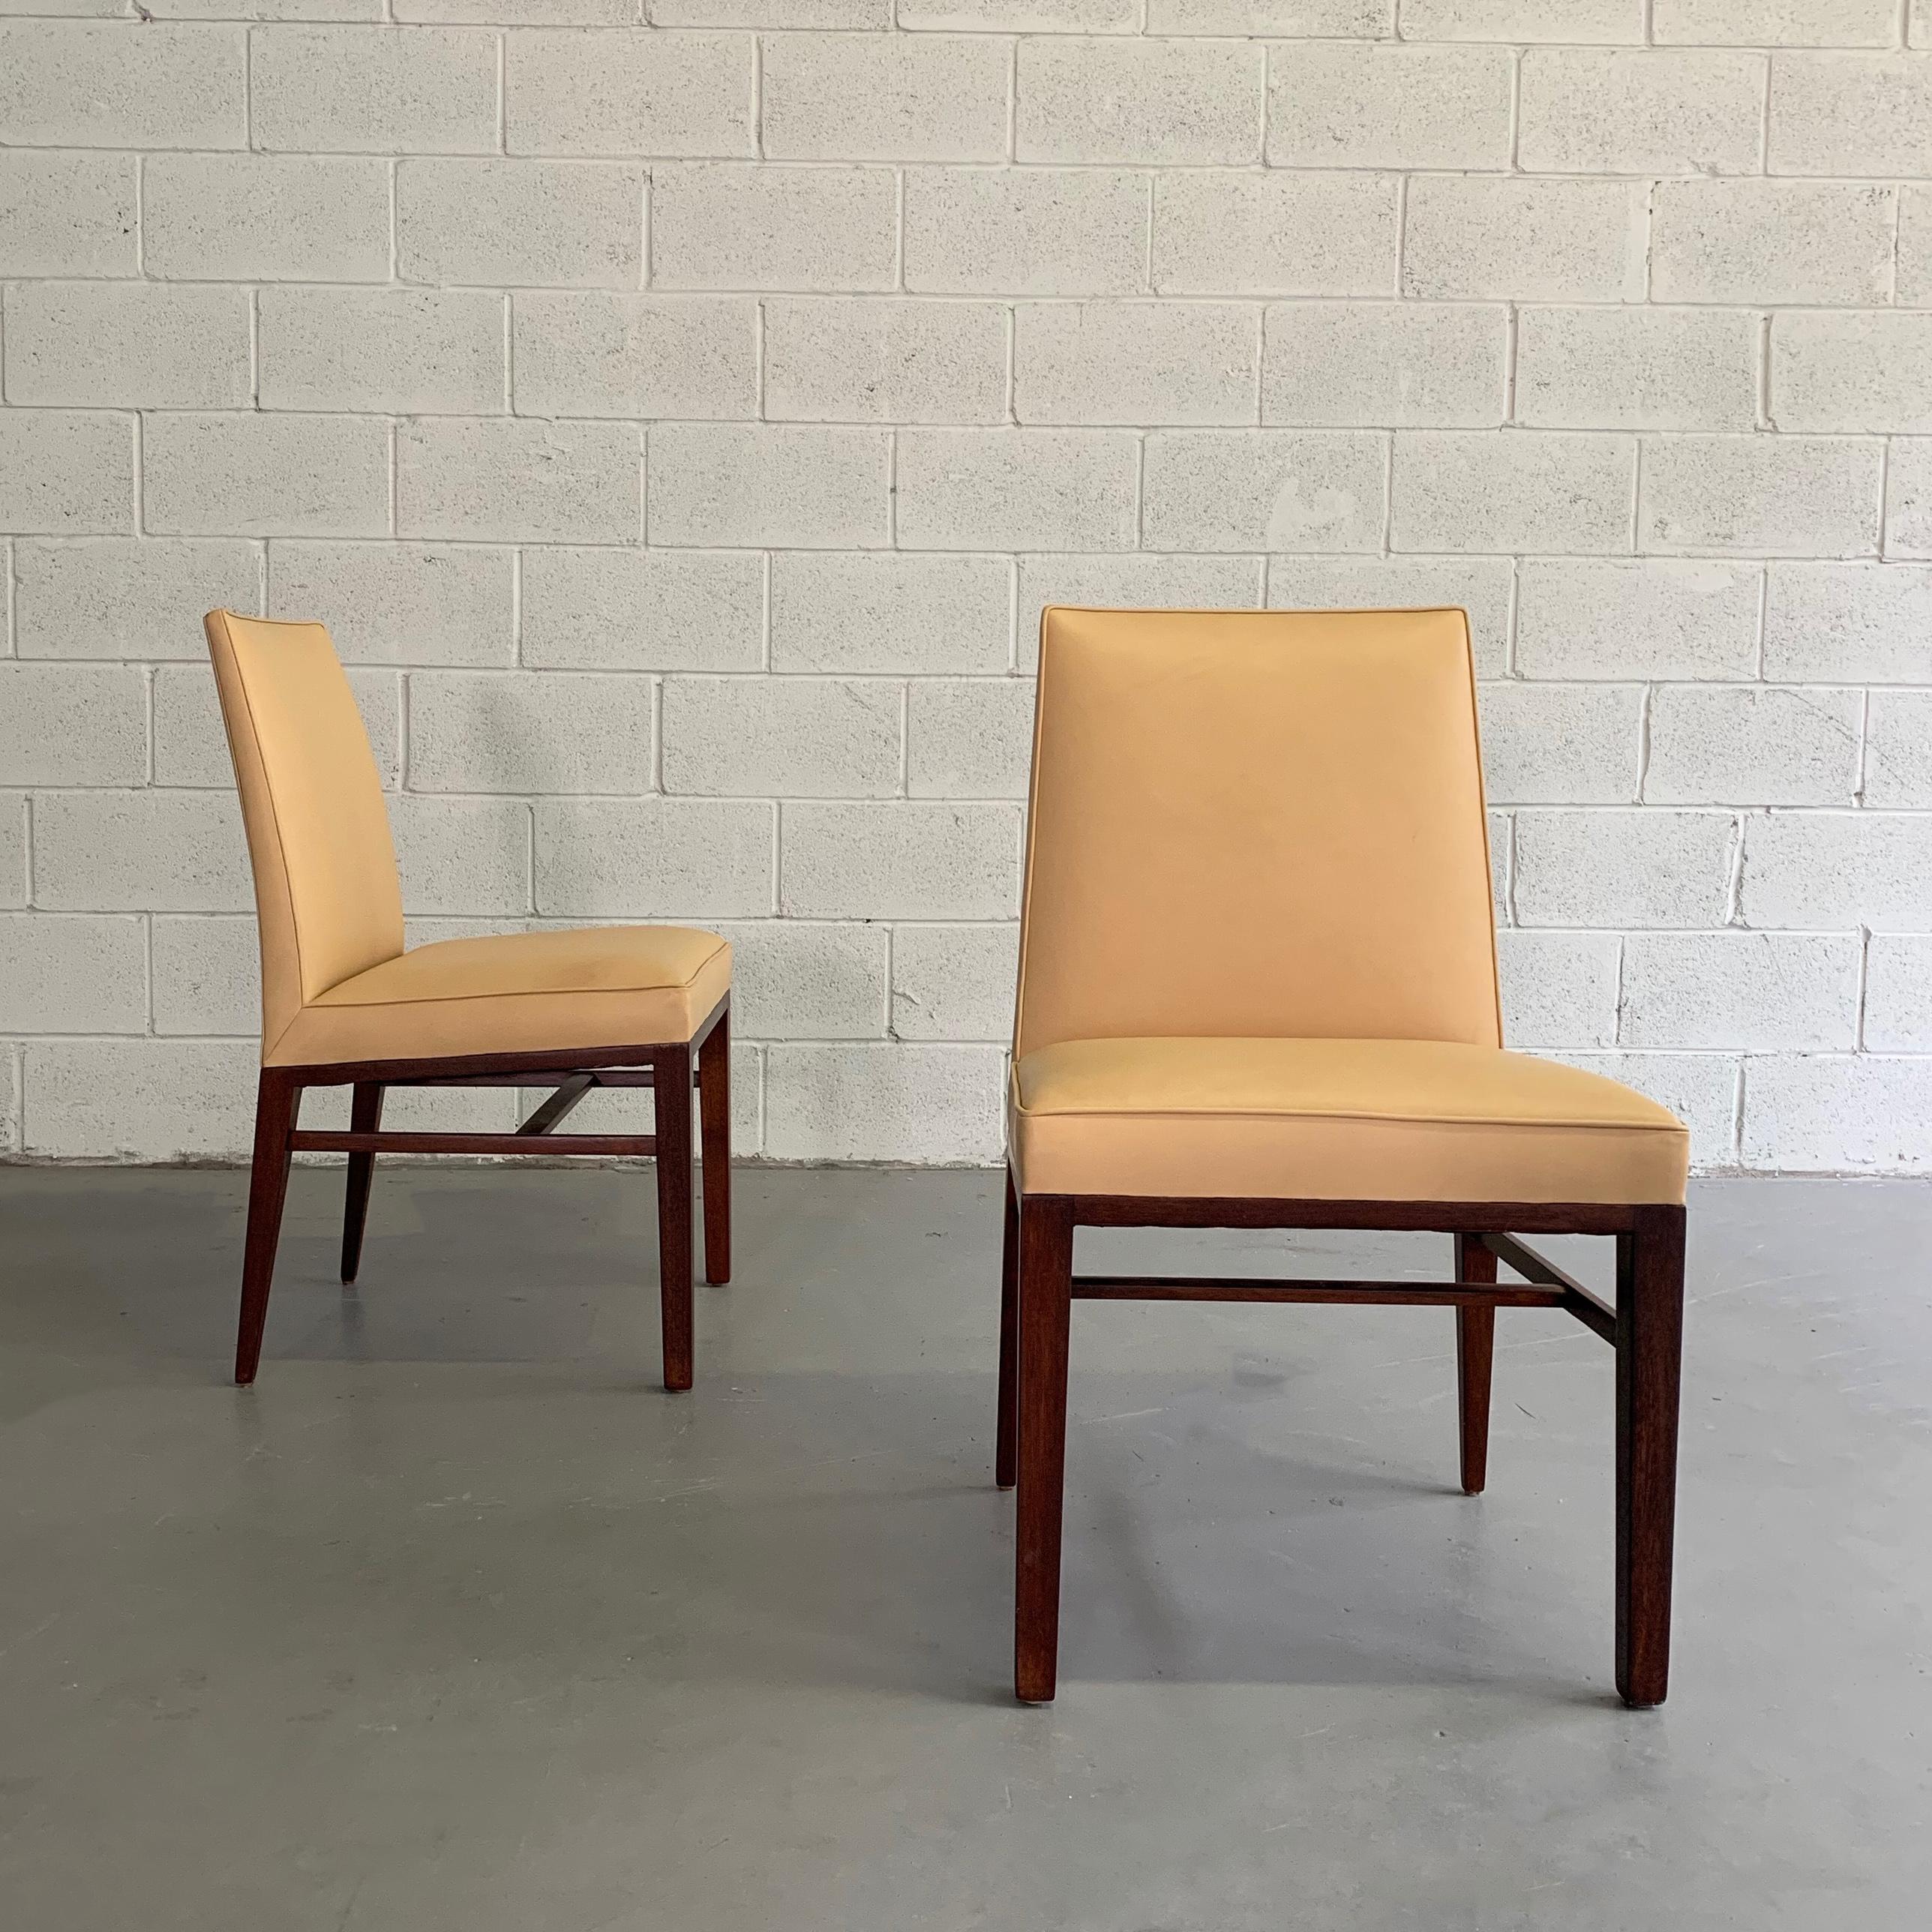 Pair of slipper, side chairs by Edward Wormley for Dunbar feature mahogany frames with high backs, upholstered in butterscotch leather.